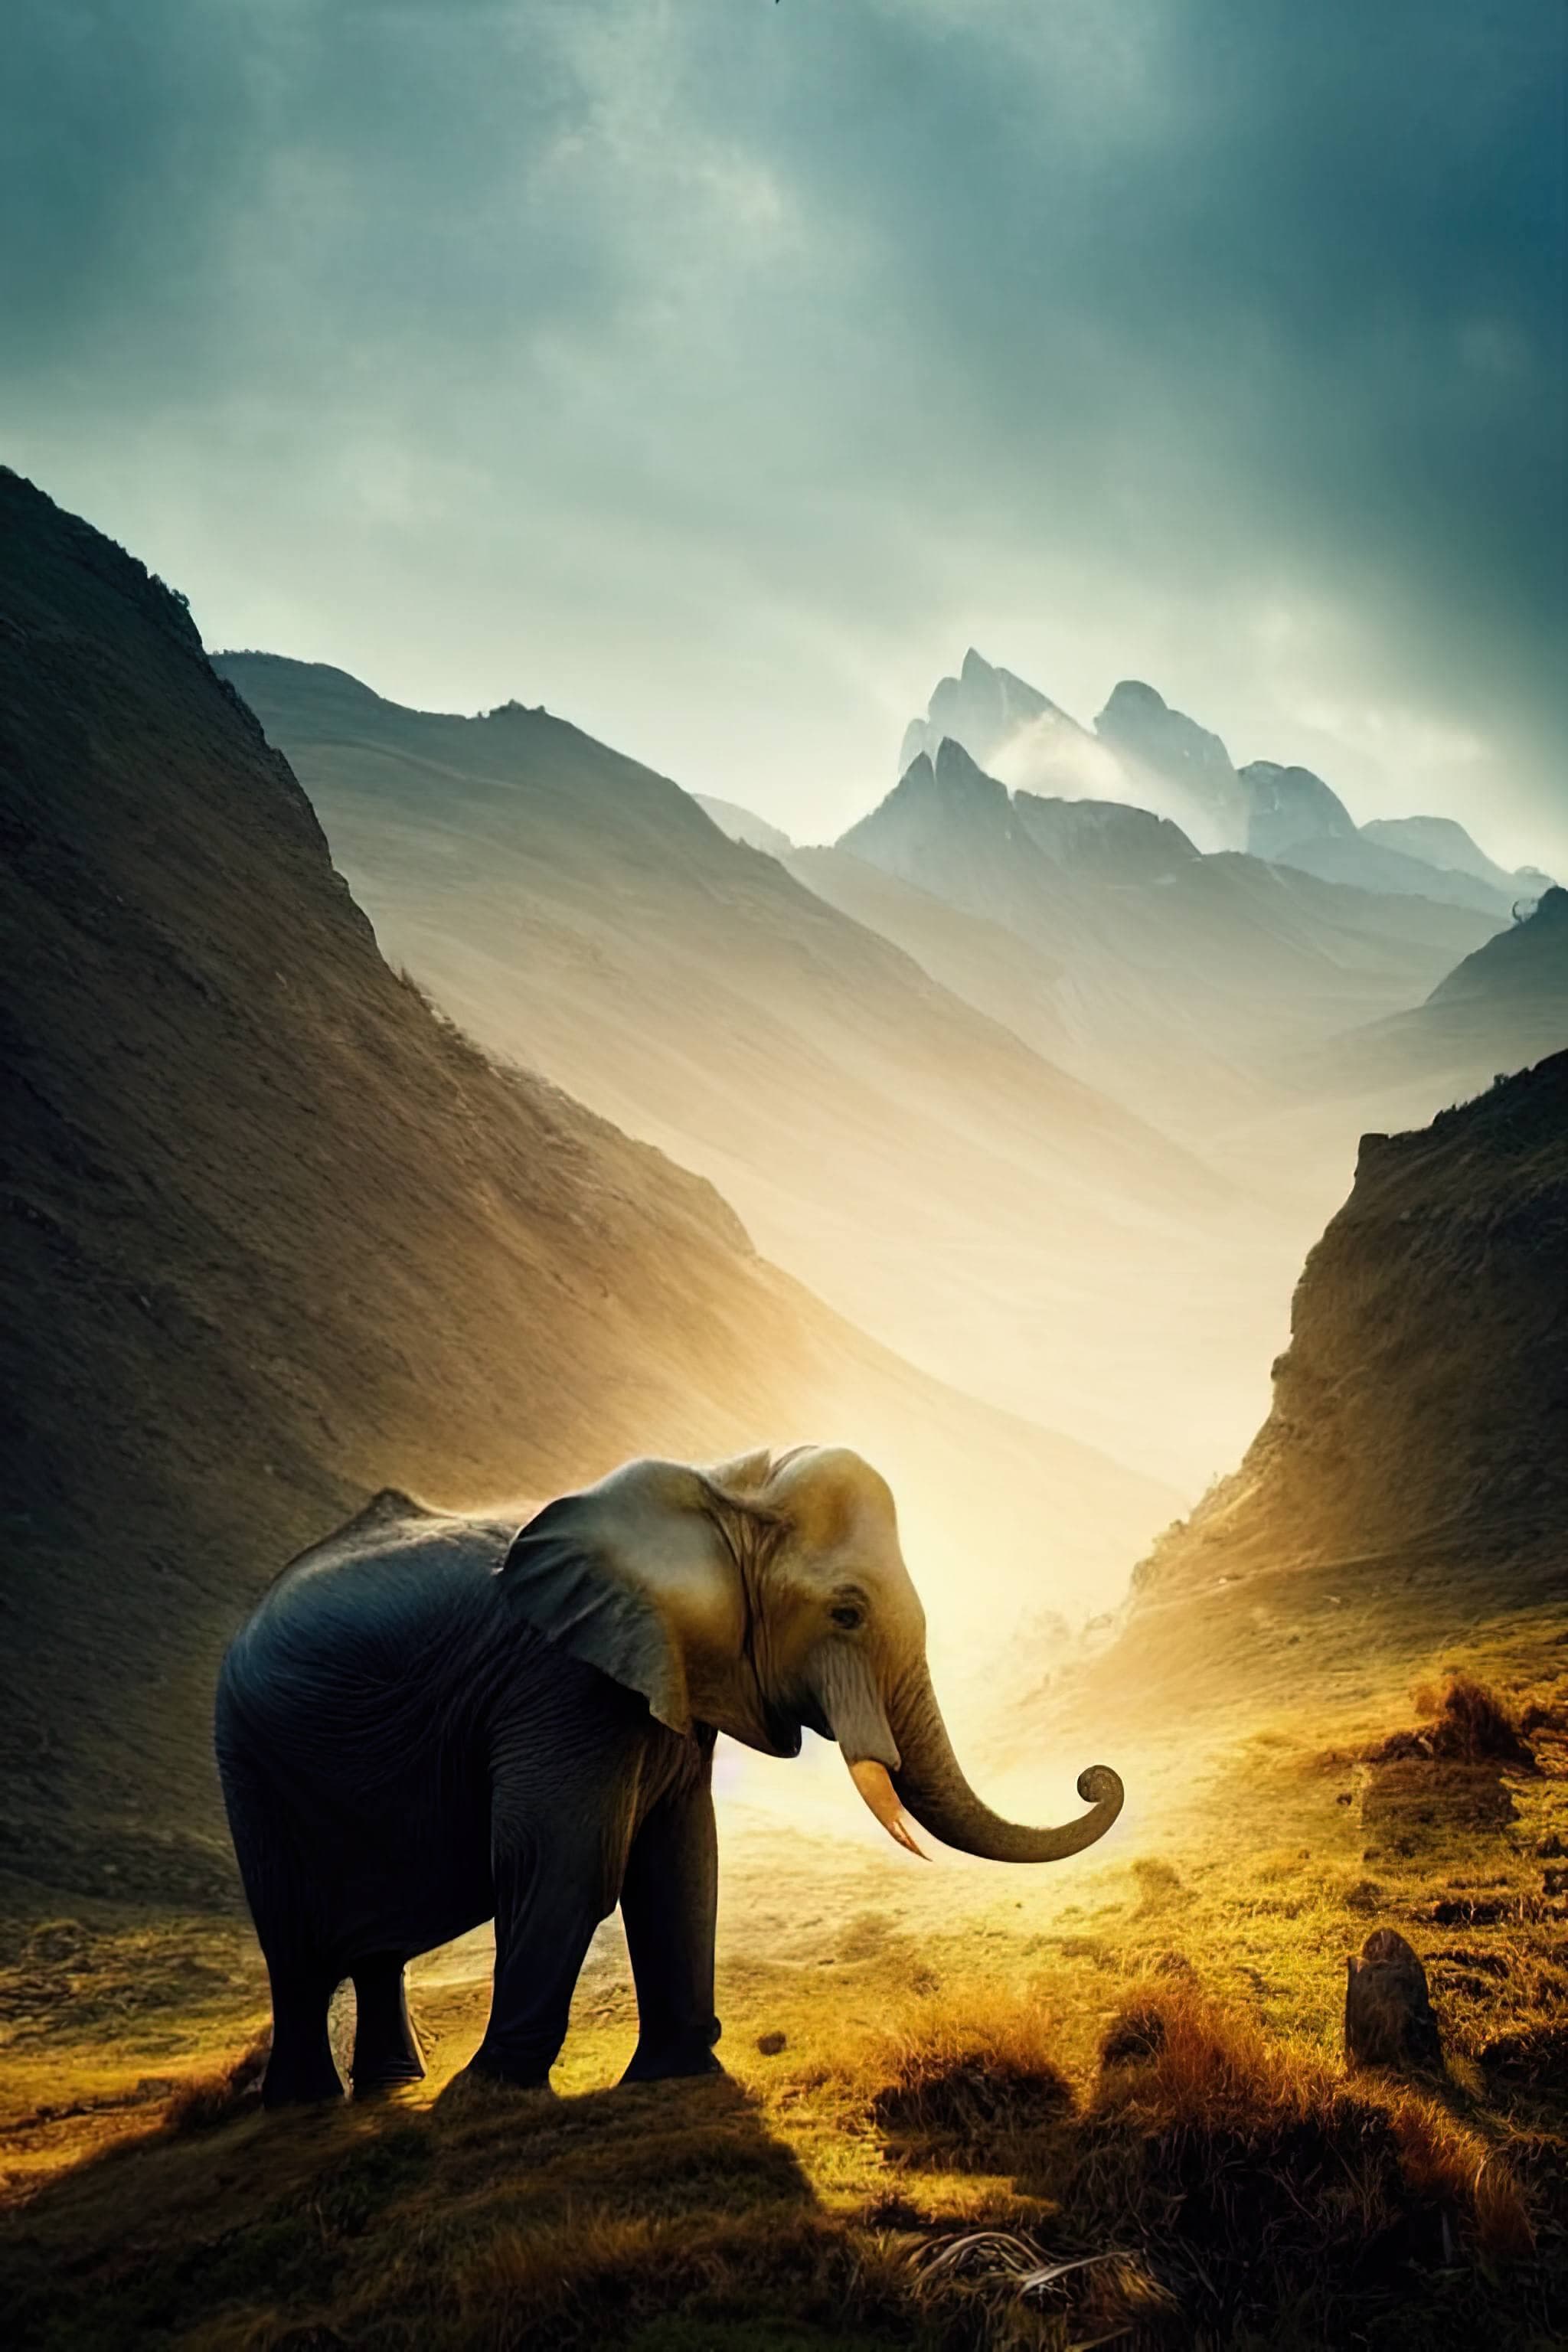 An elephant standing on a hill